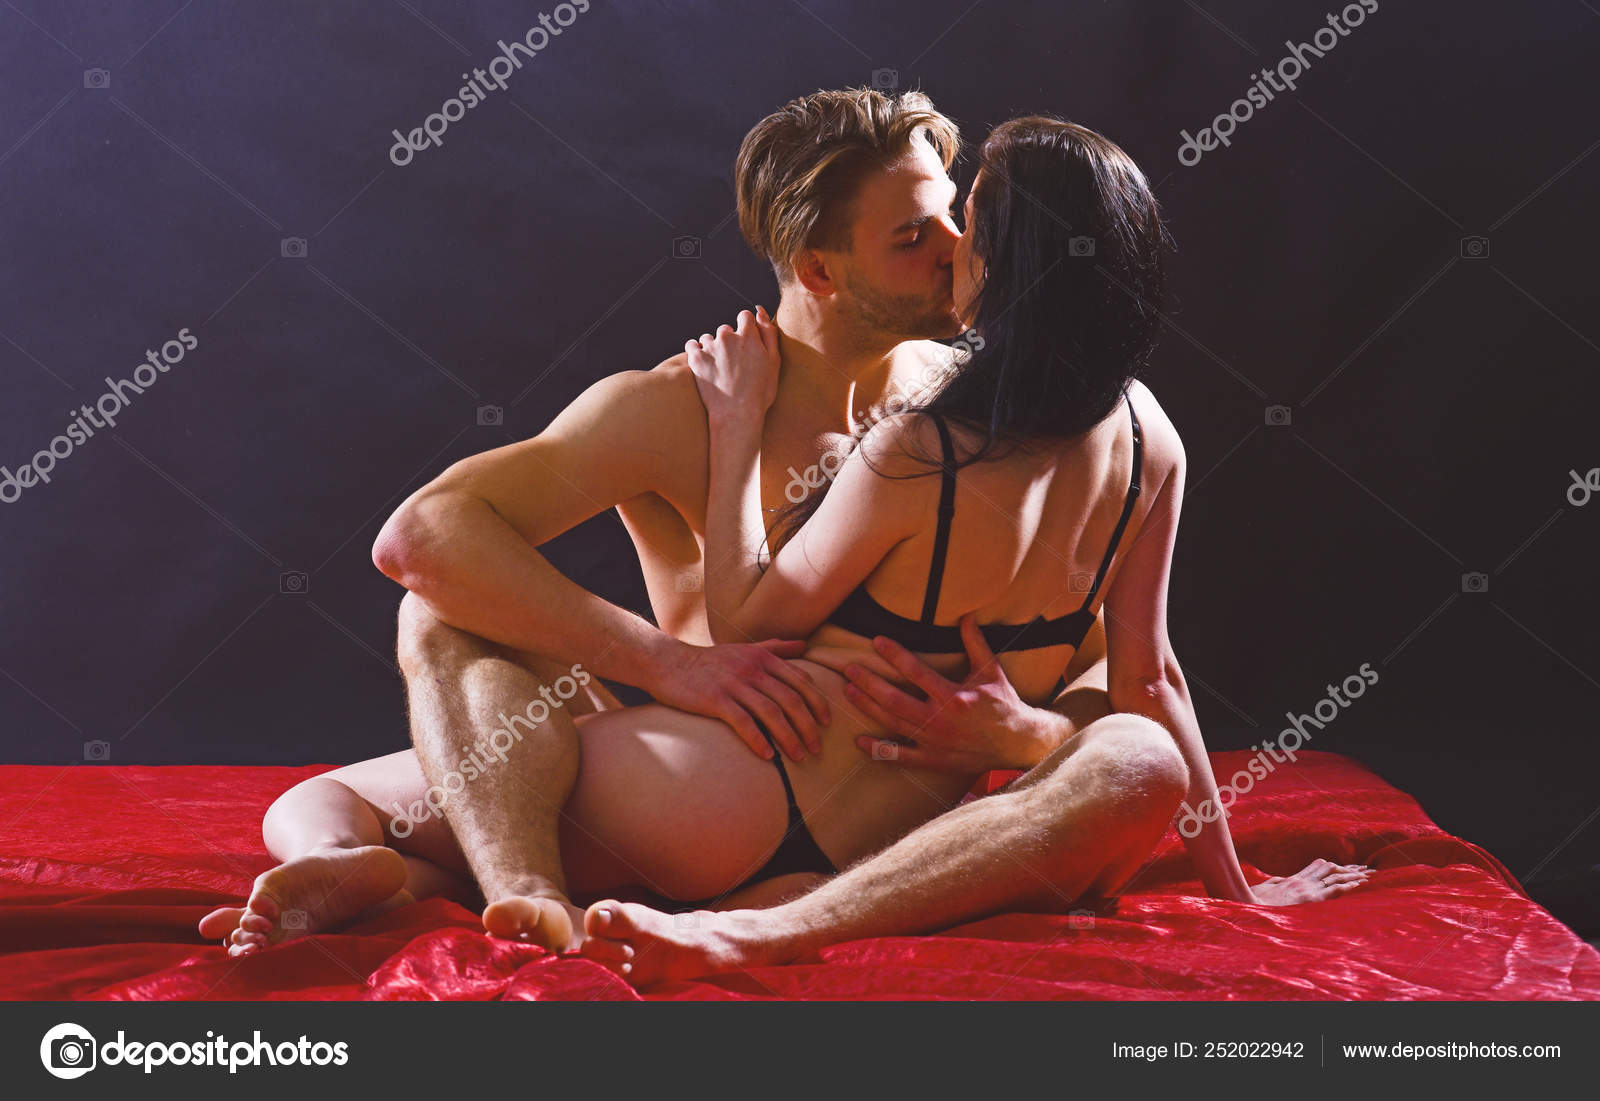 Man hug sexual girlfriend naked buttocks. Sex and love concept. Couple intimate atmosphere. Lover and sexy naked female body foreplay in photo